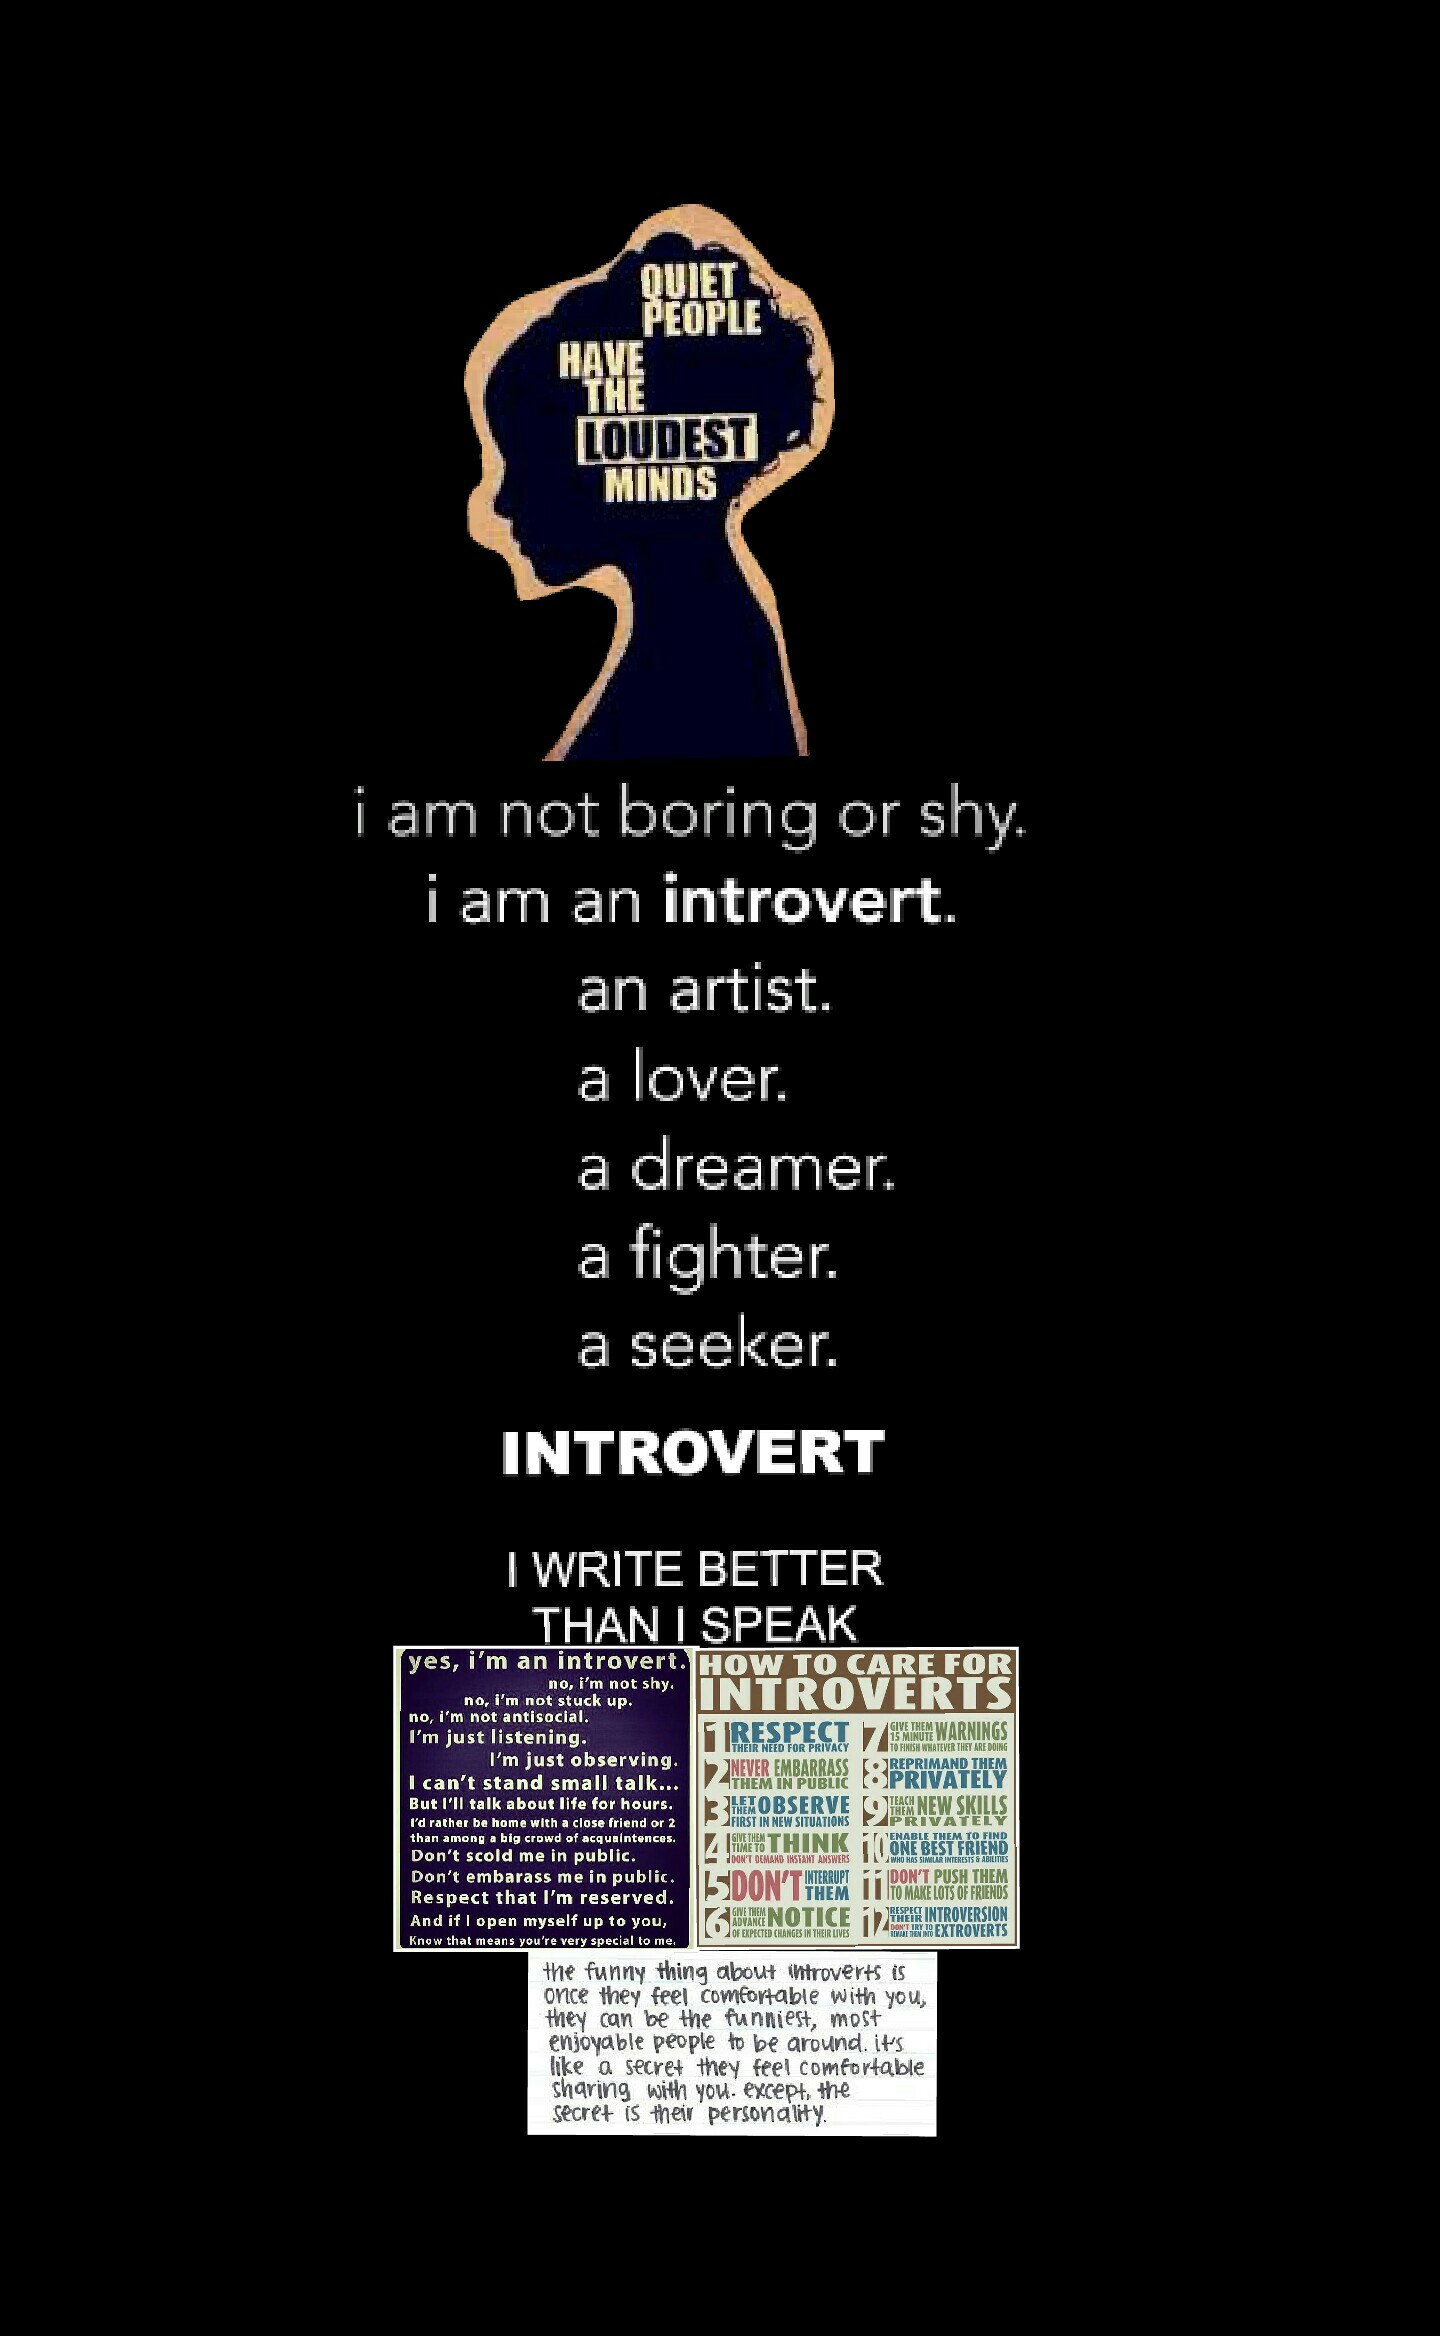 169 PicCollage: For all the introverts out there